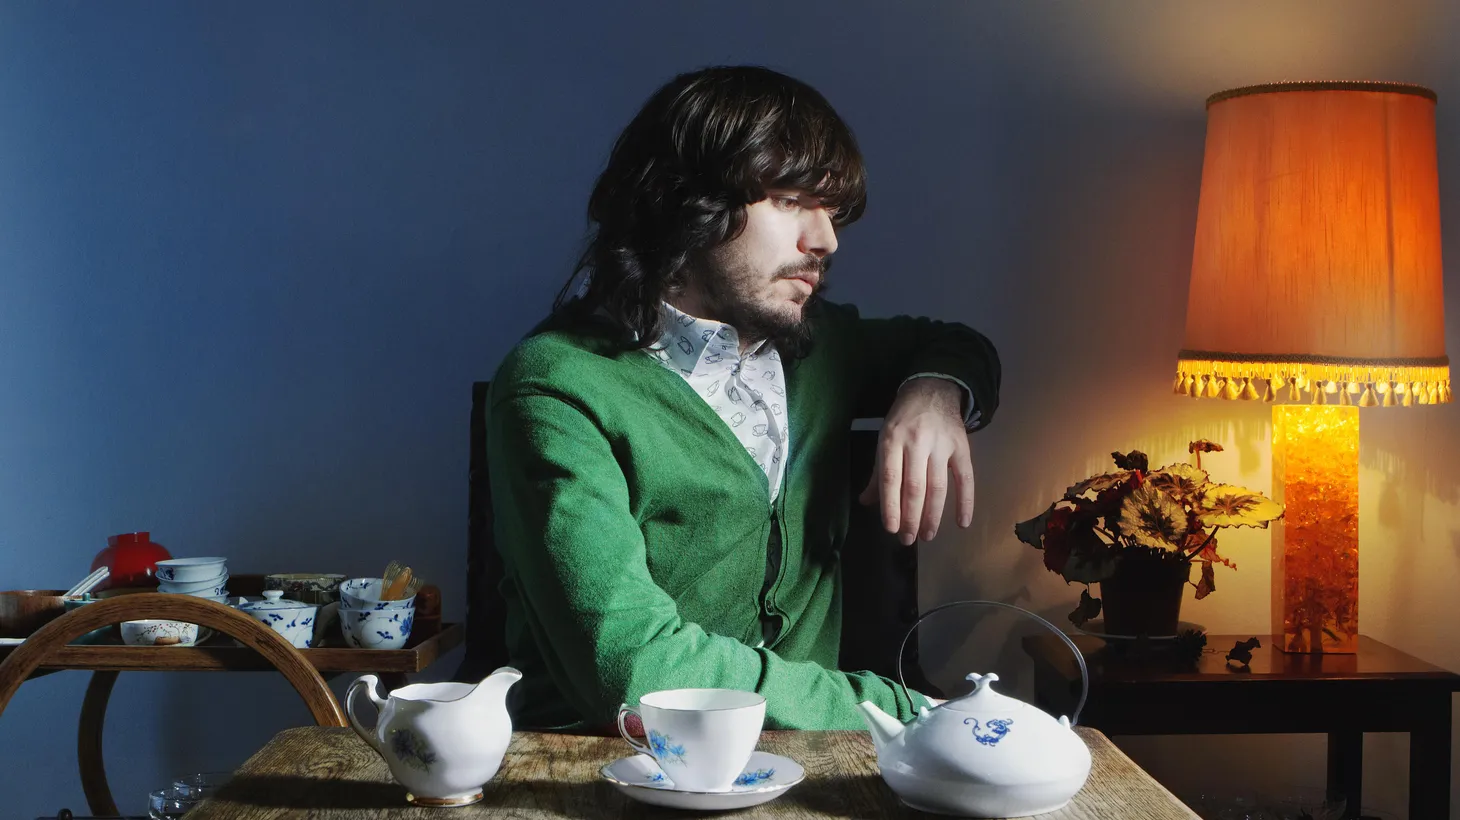 Genre-bending electronic producer Bibio has made a great new album that we are all enjoying here at KCRW. He’ll perform new songs on Morning Becomes Eclectic at 11:15am.